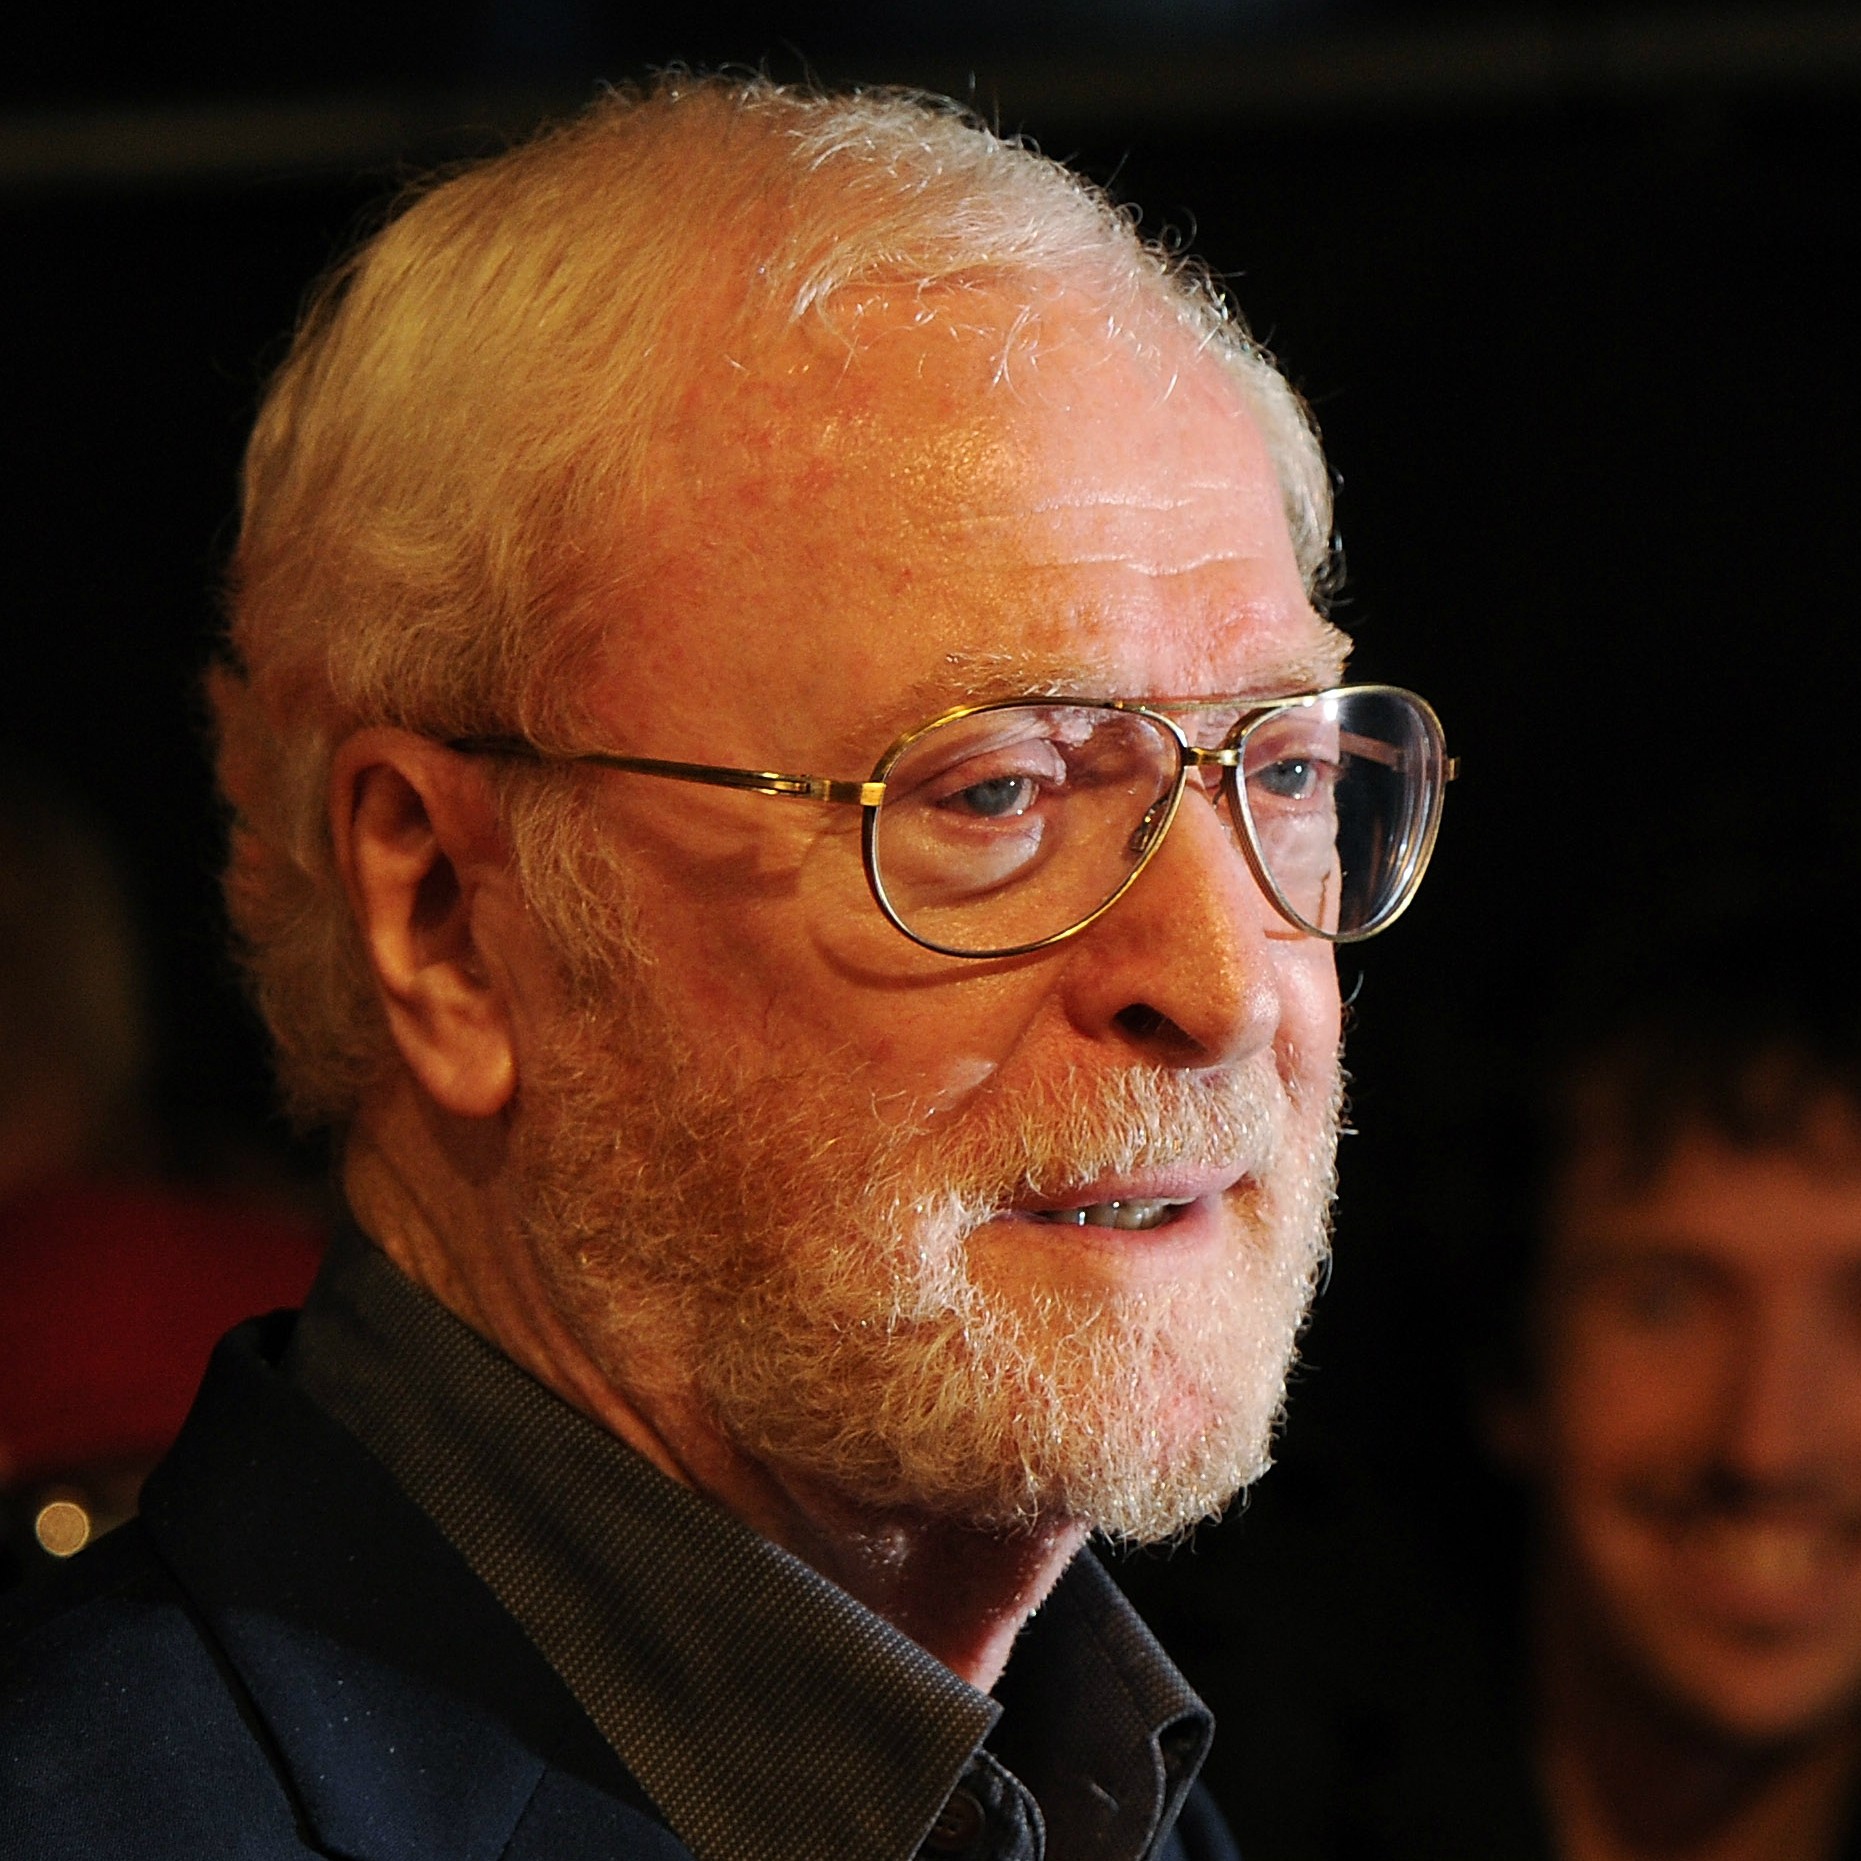 O ator Michael Caine nasceu Maurice Joseph Micklewhite. (Foto: Getty Images)